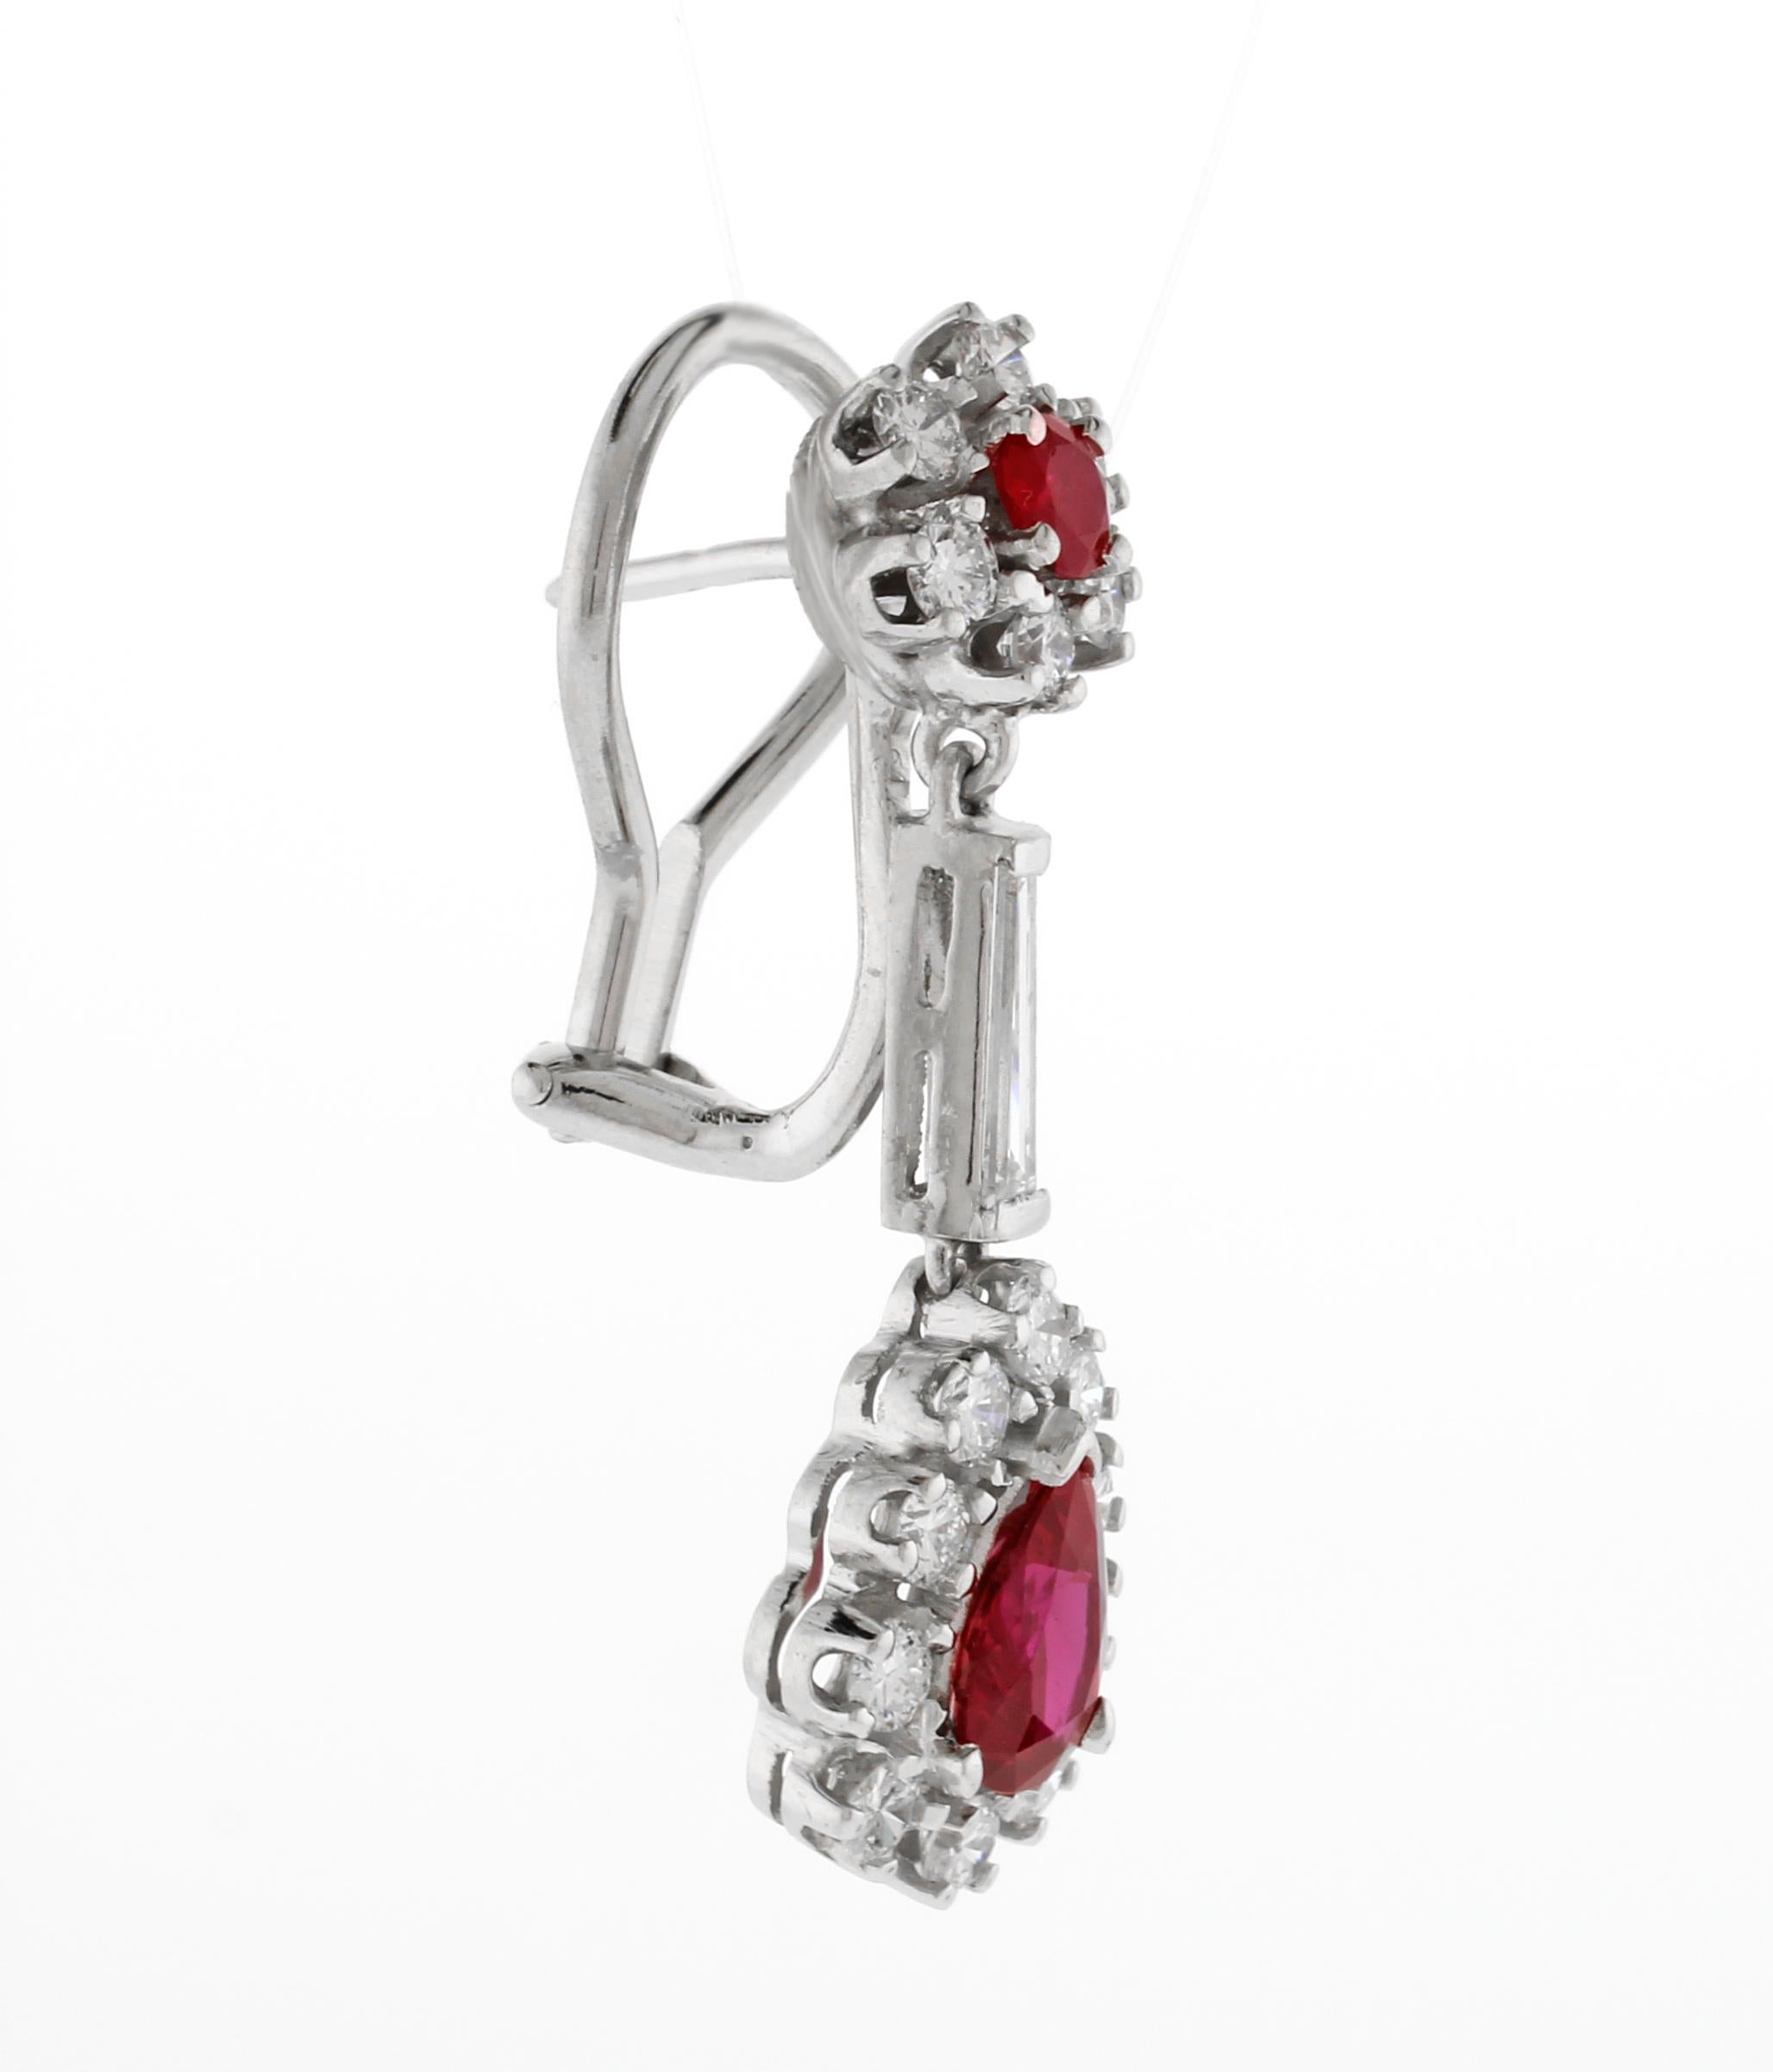 Whether you're looking for a timeless and classic design or a more contemporary and unique style, these ruby and diamond drop earrings are versatile enough to suit many occasions.
♦ Circa: 1960s
♦ Metal: Platinum
♦ Length: 1.25inches
♦ Gemstone: 2